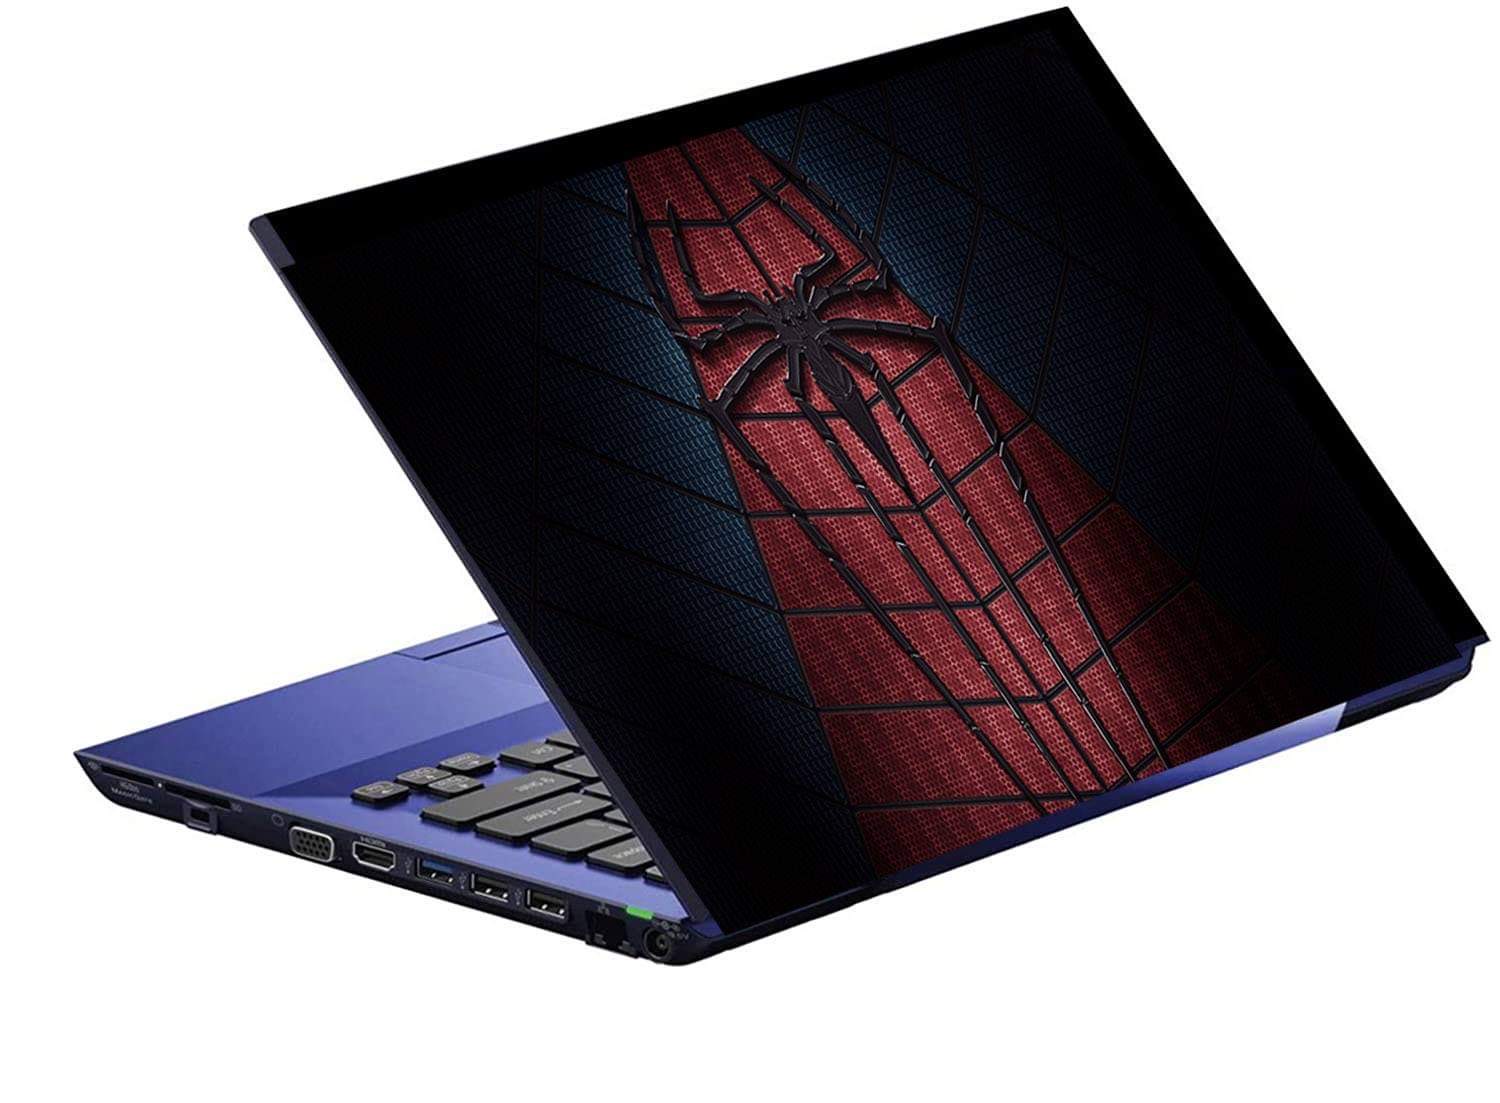 Spiderman Decal Stickers For Laptop Screen Background design